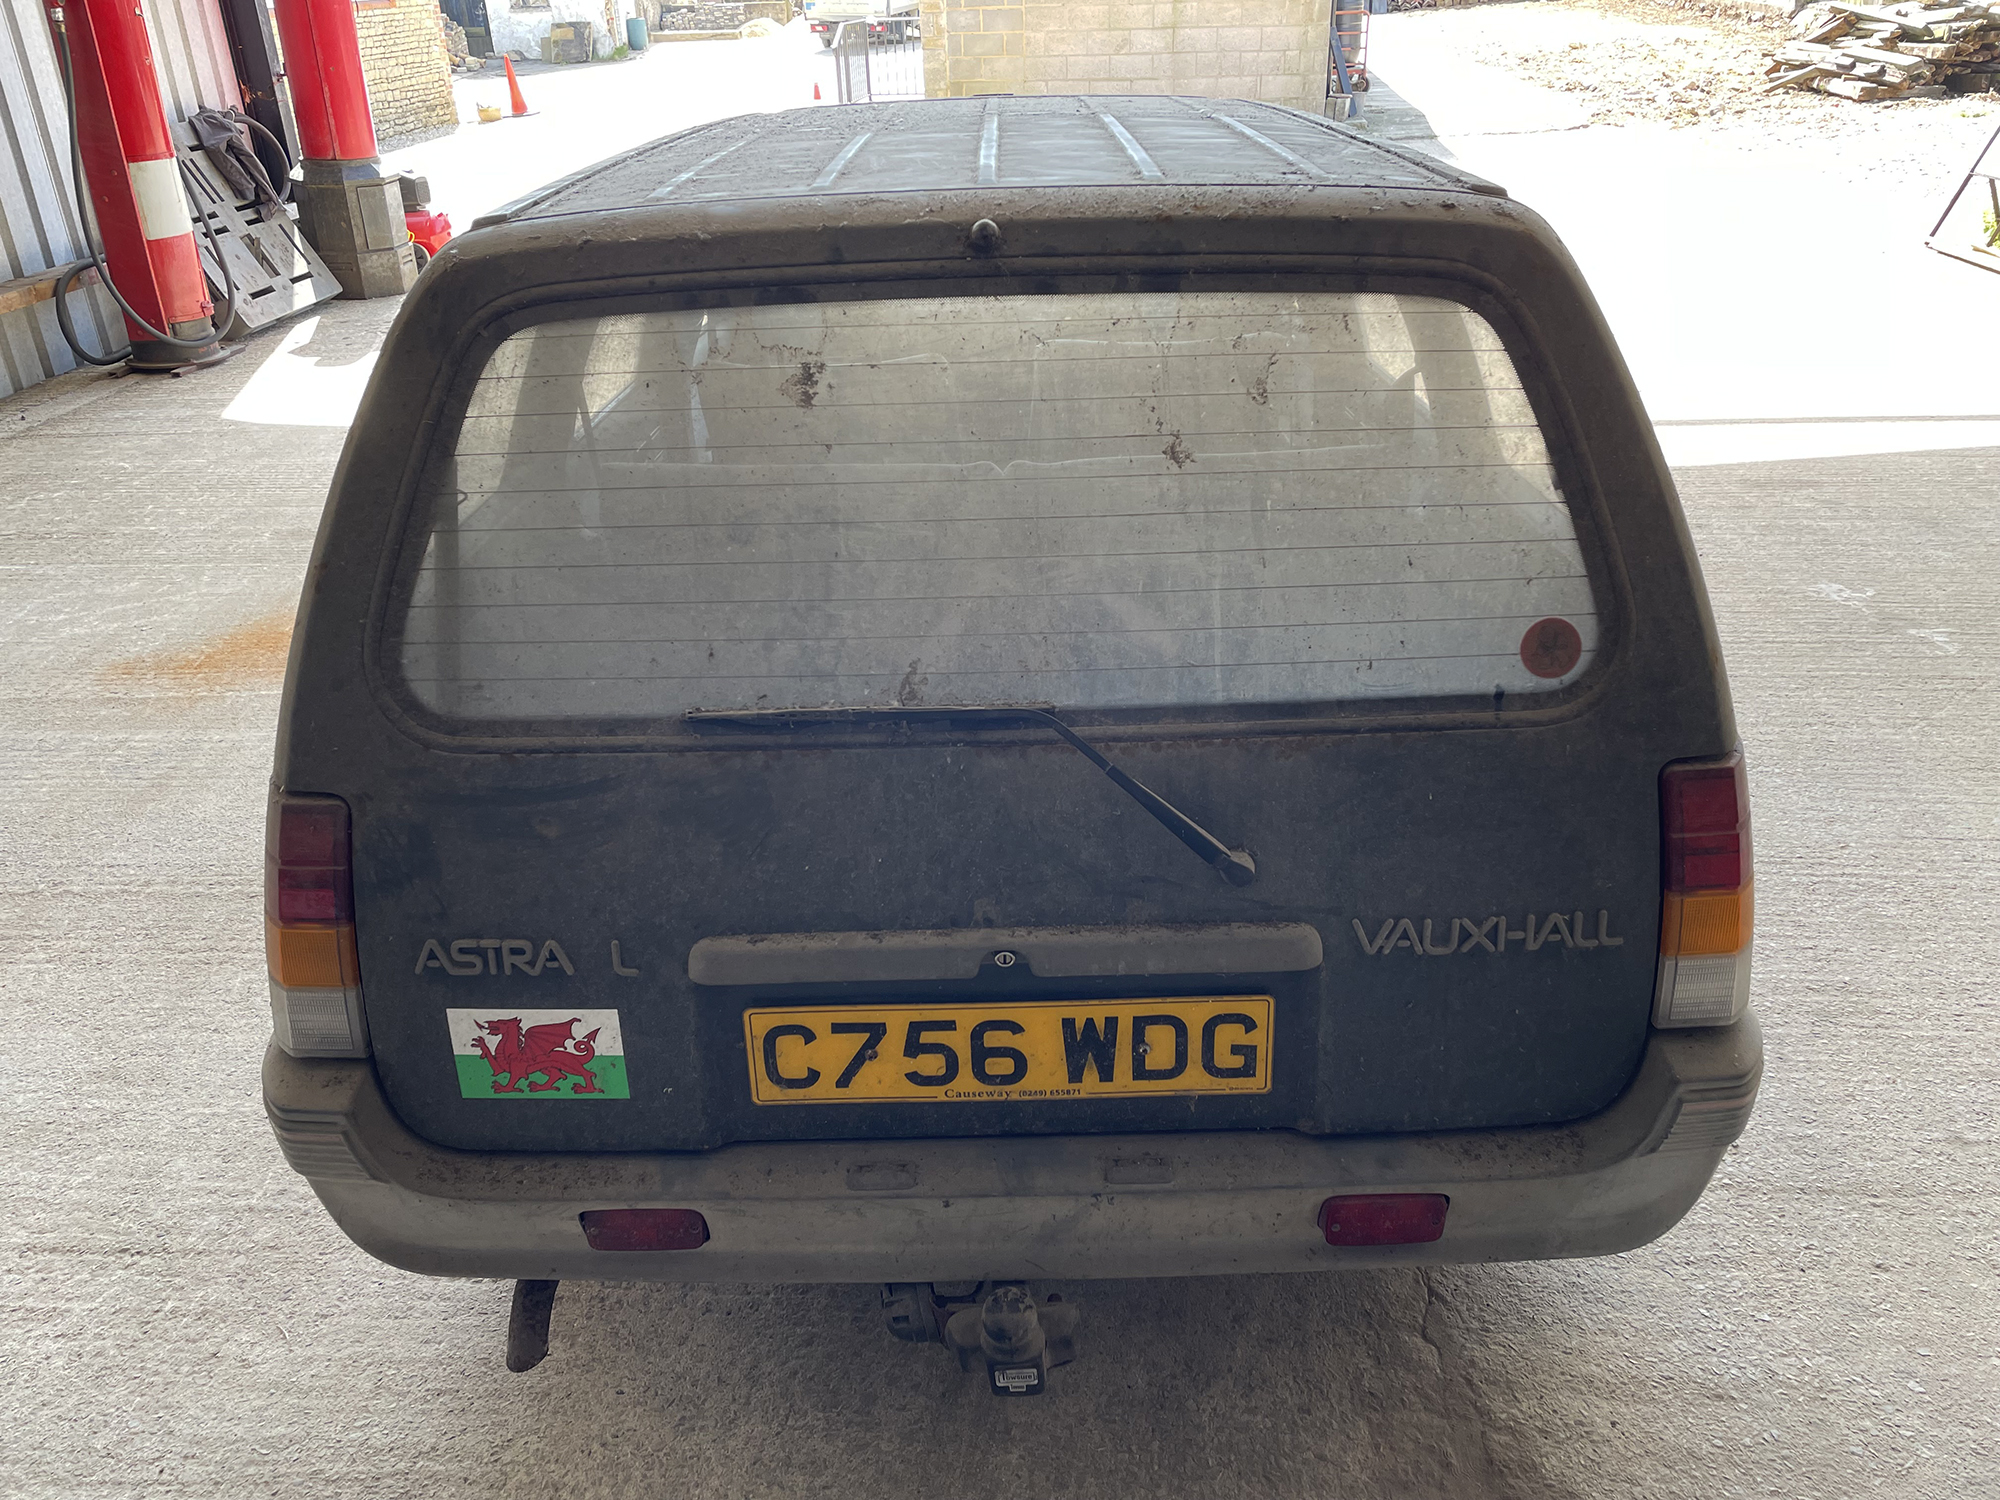 1986 Vauxhall Astra Estate Reg. no. C756 WDG Chassis no. W0L0004662557458 - Image 7 of 14